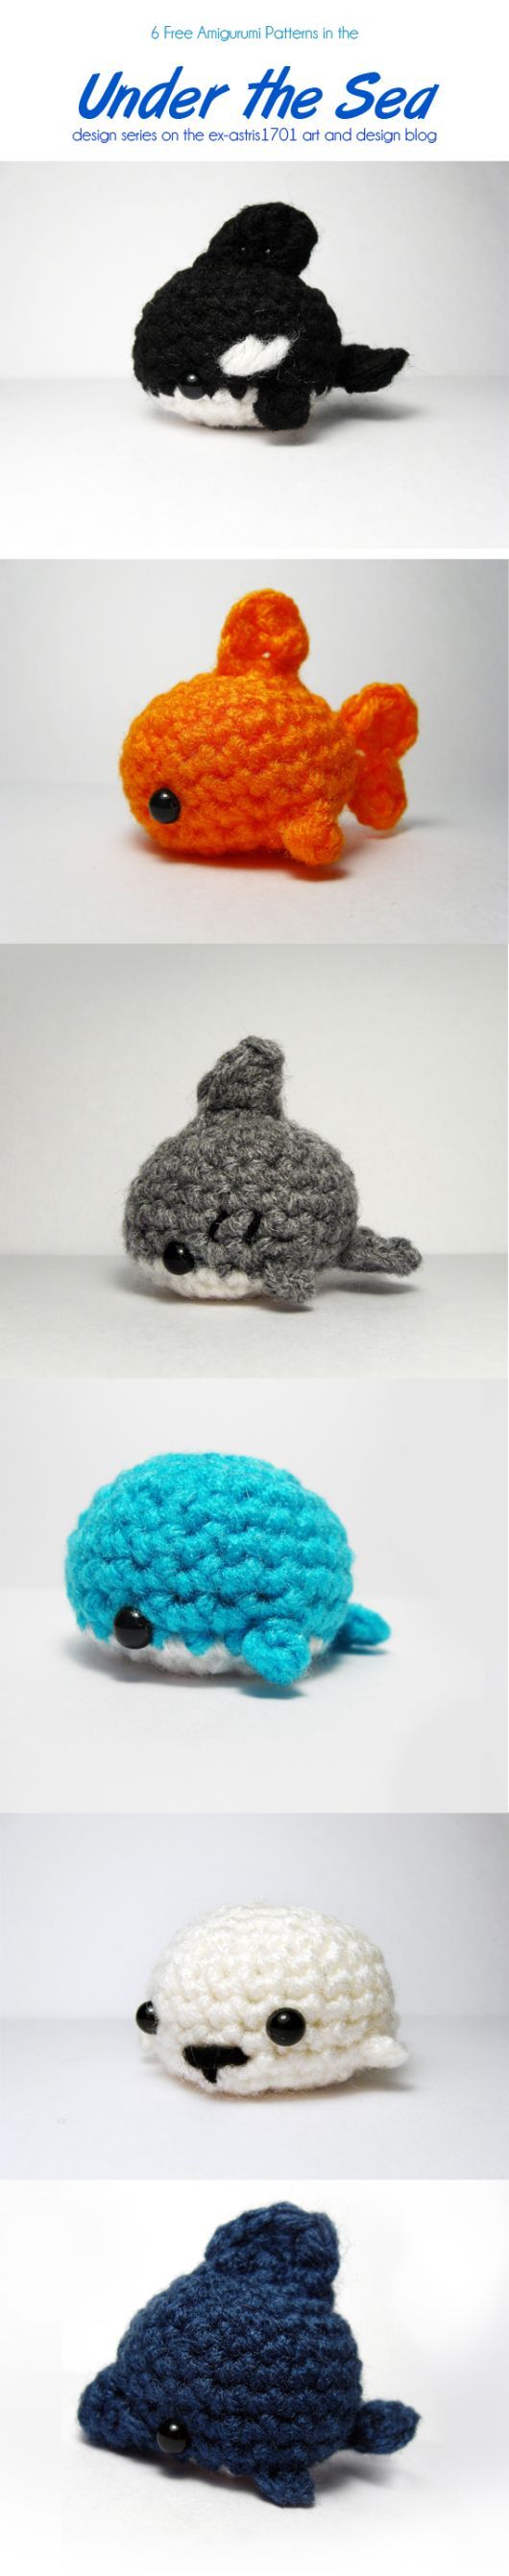 Under the Sea crochet fish! Awwww. DIY pet fish!  Take an empty fish bowl and th